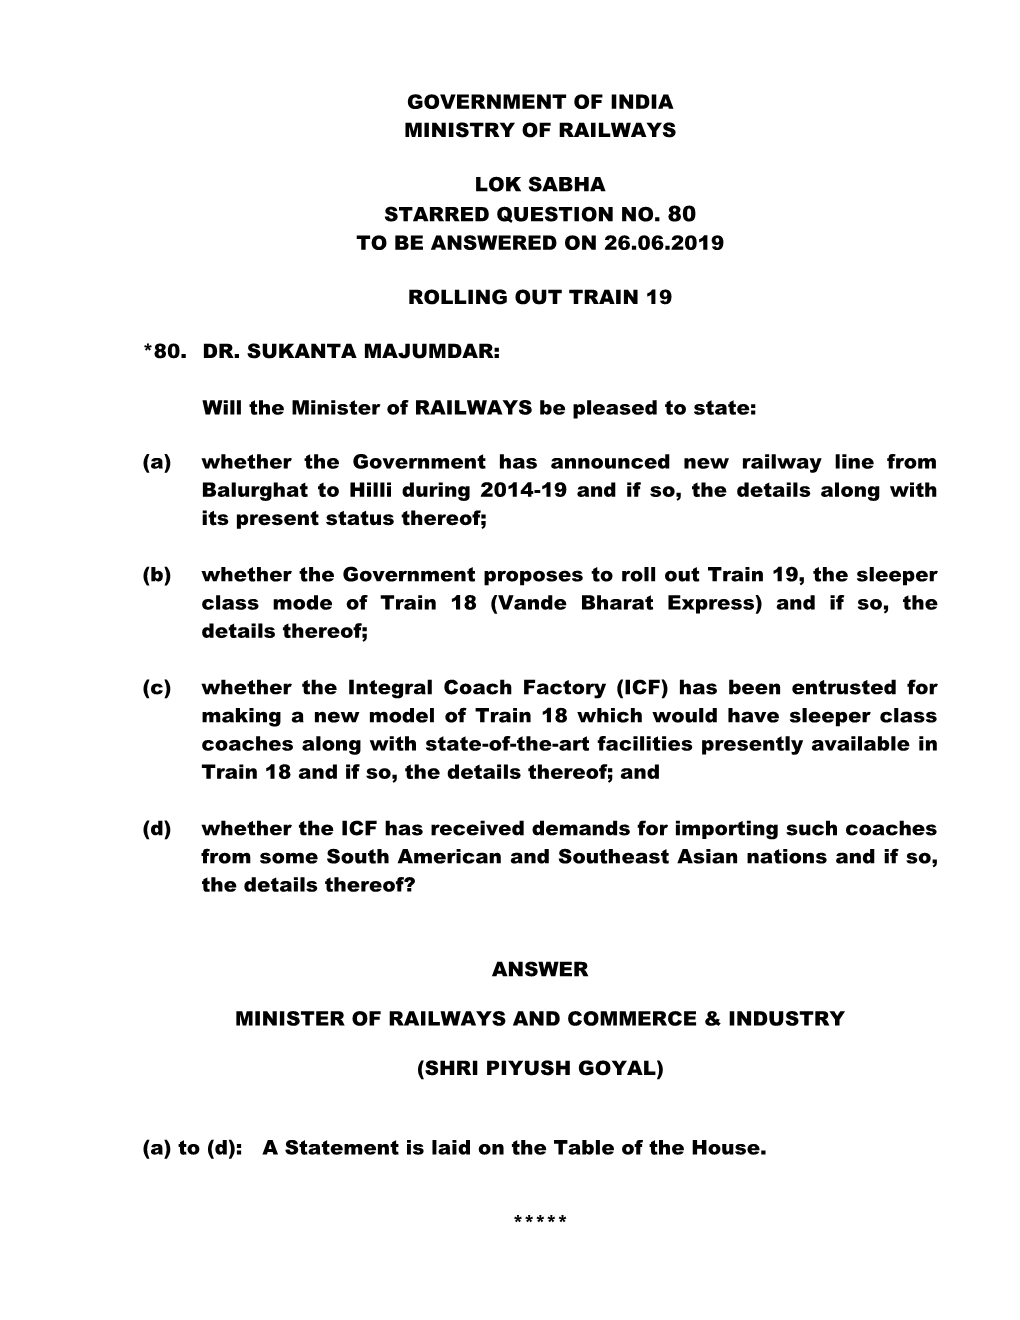 Government of India Ministry of Railways Lok Sabha Starred Question No. 80 to Be Answered on 26.06.2019 Rolling out Train 19